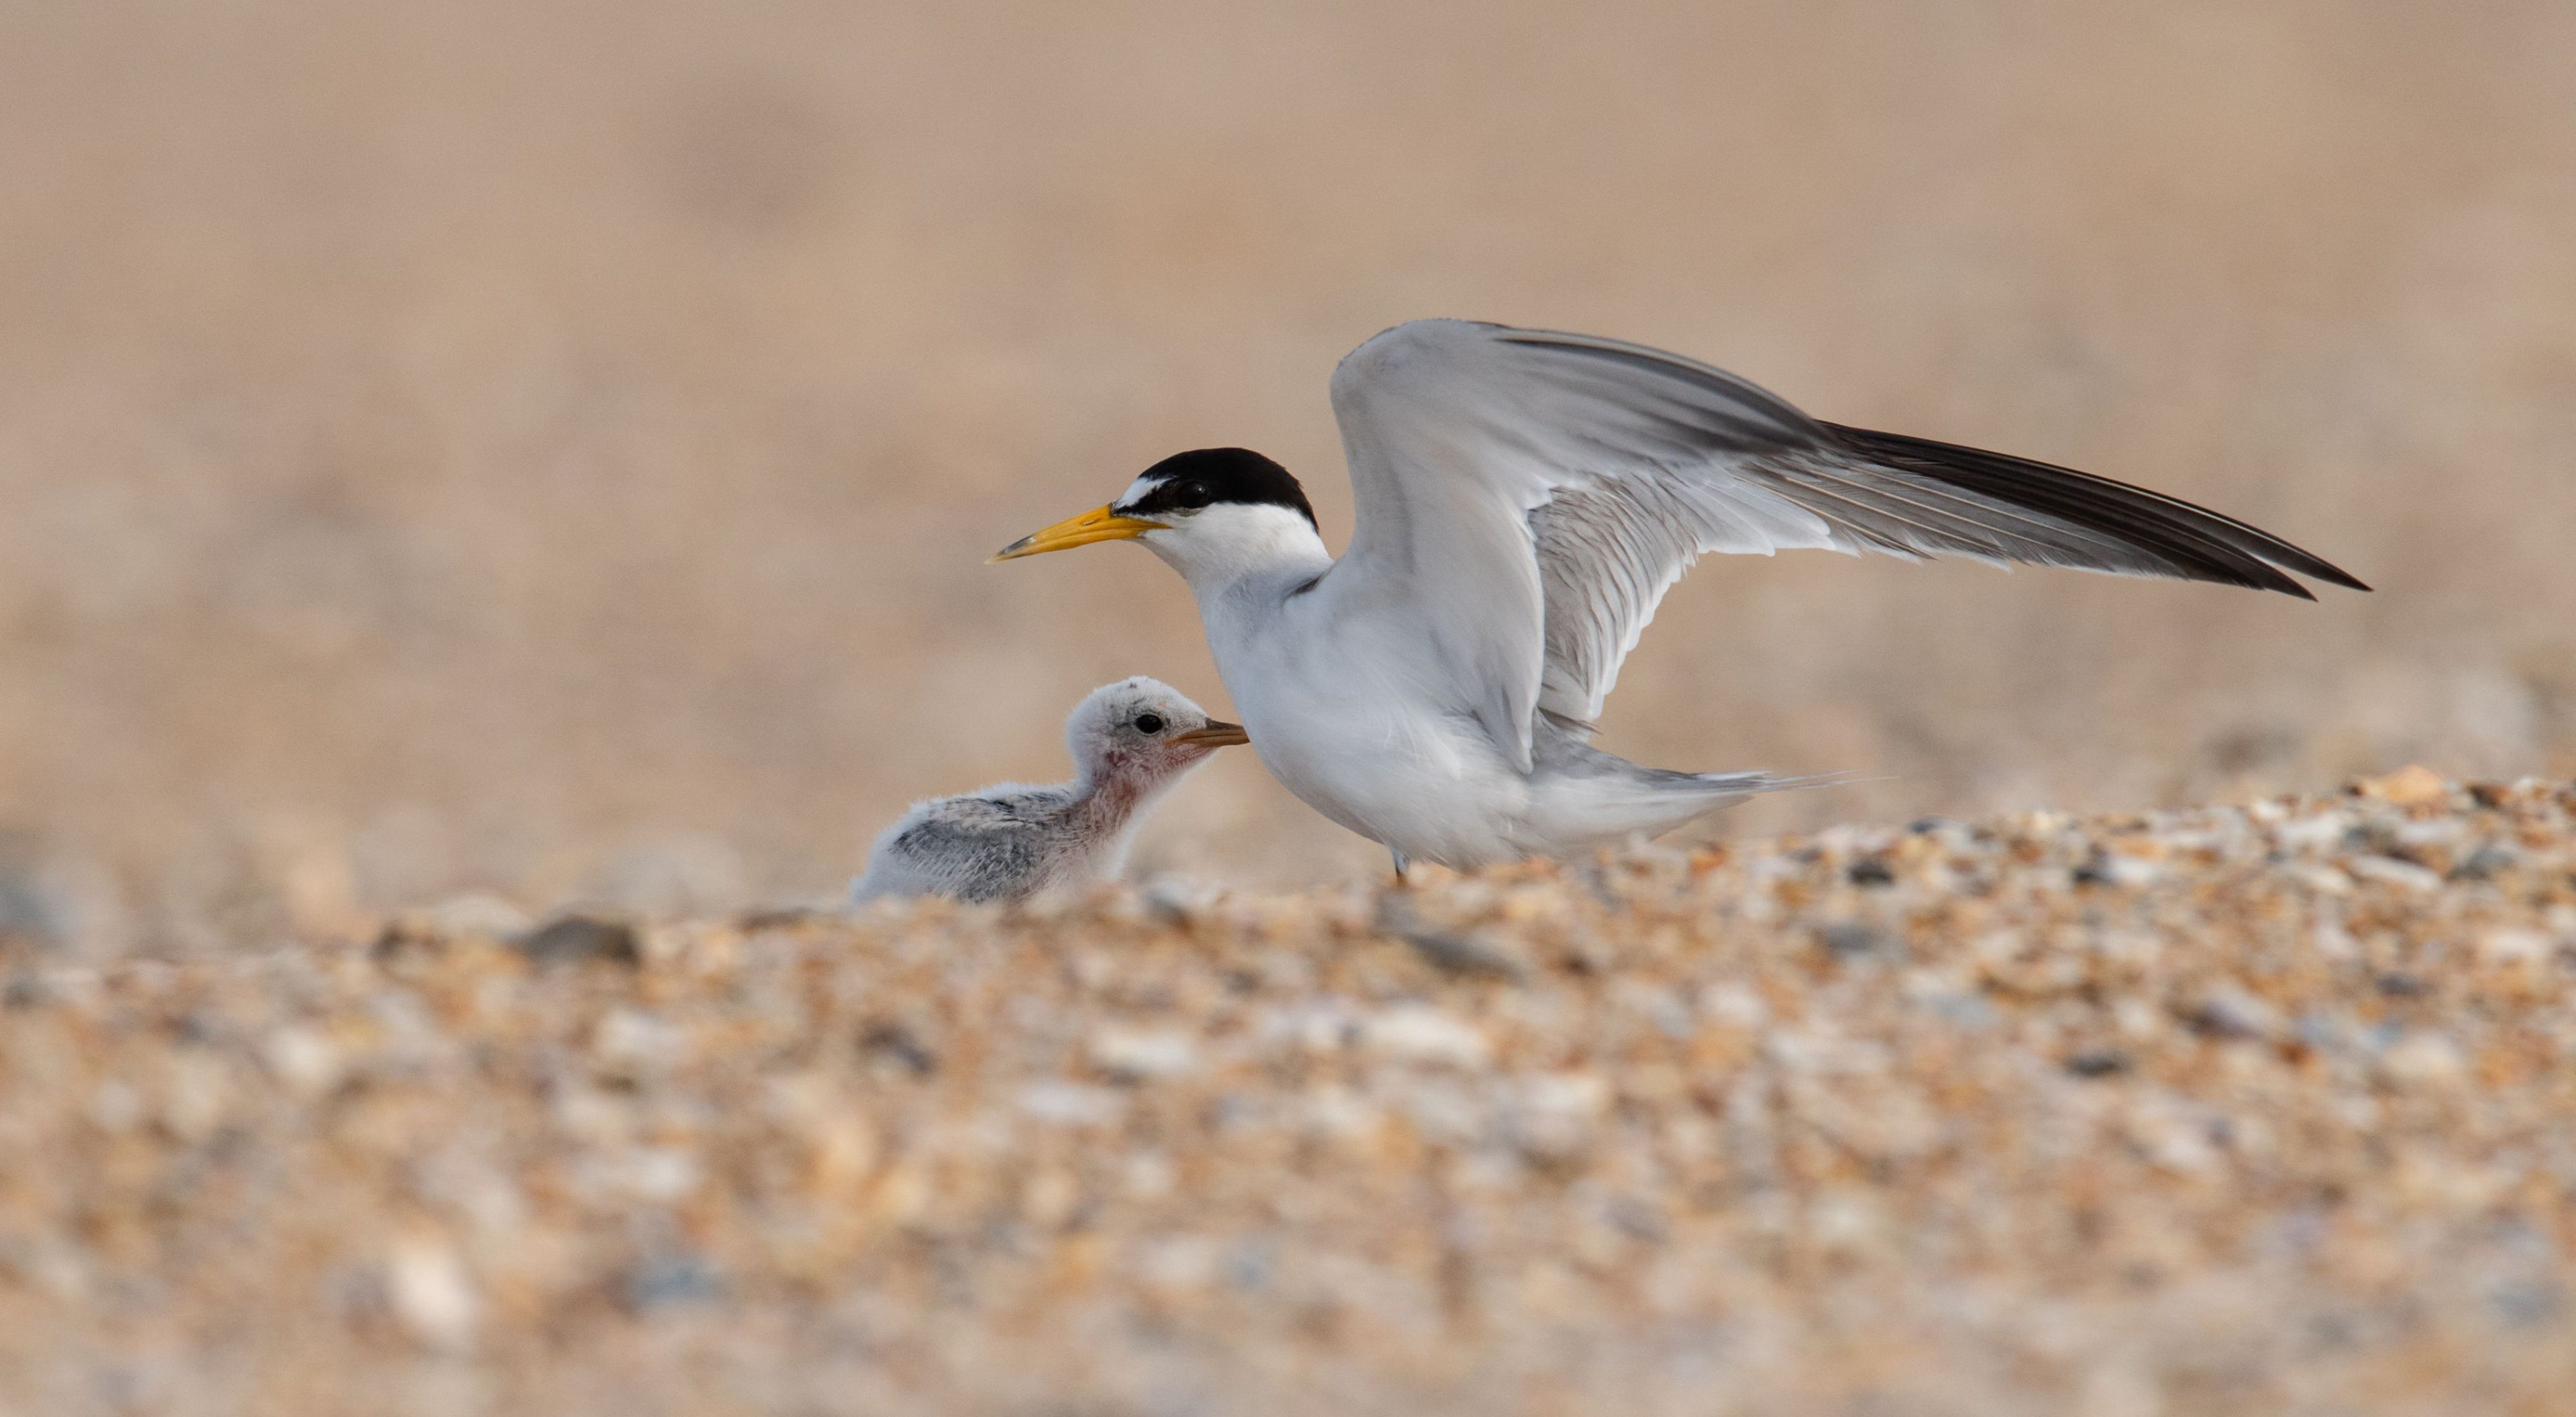 A least tern with a chick on the beach.